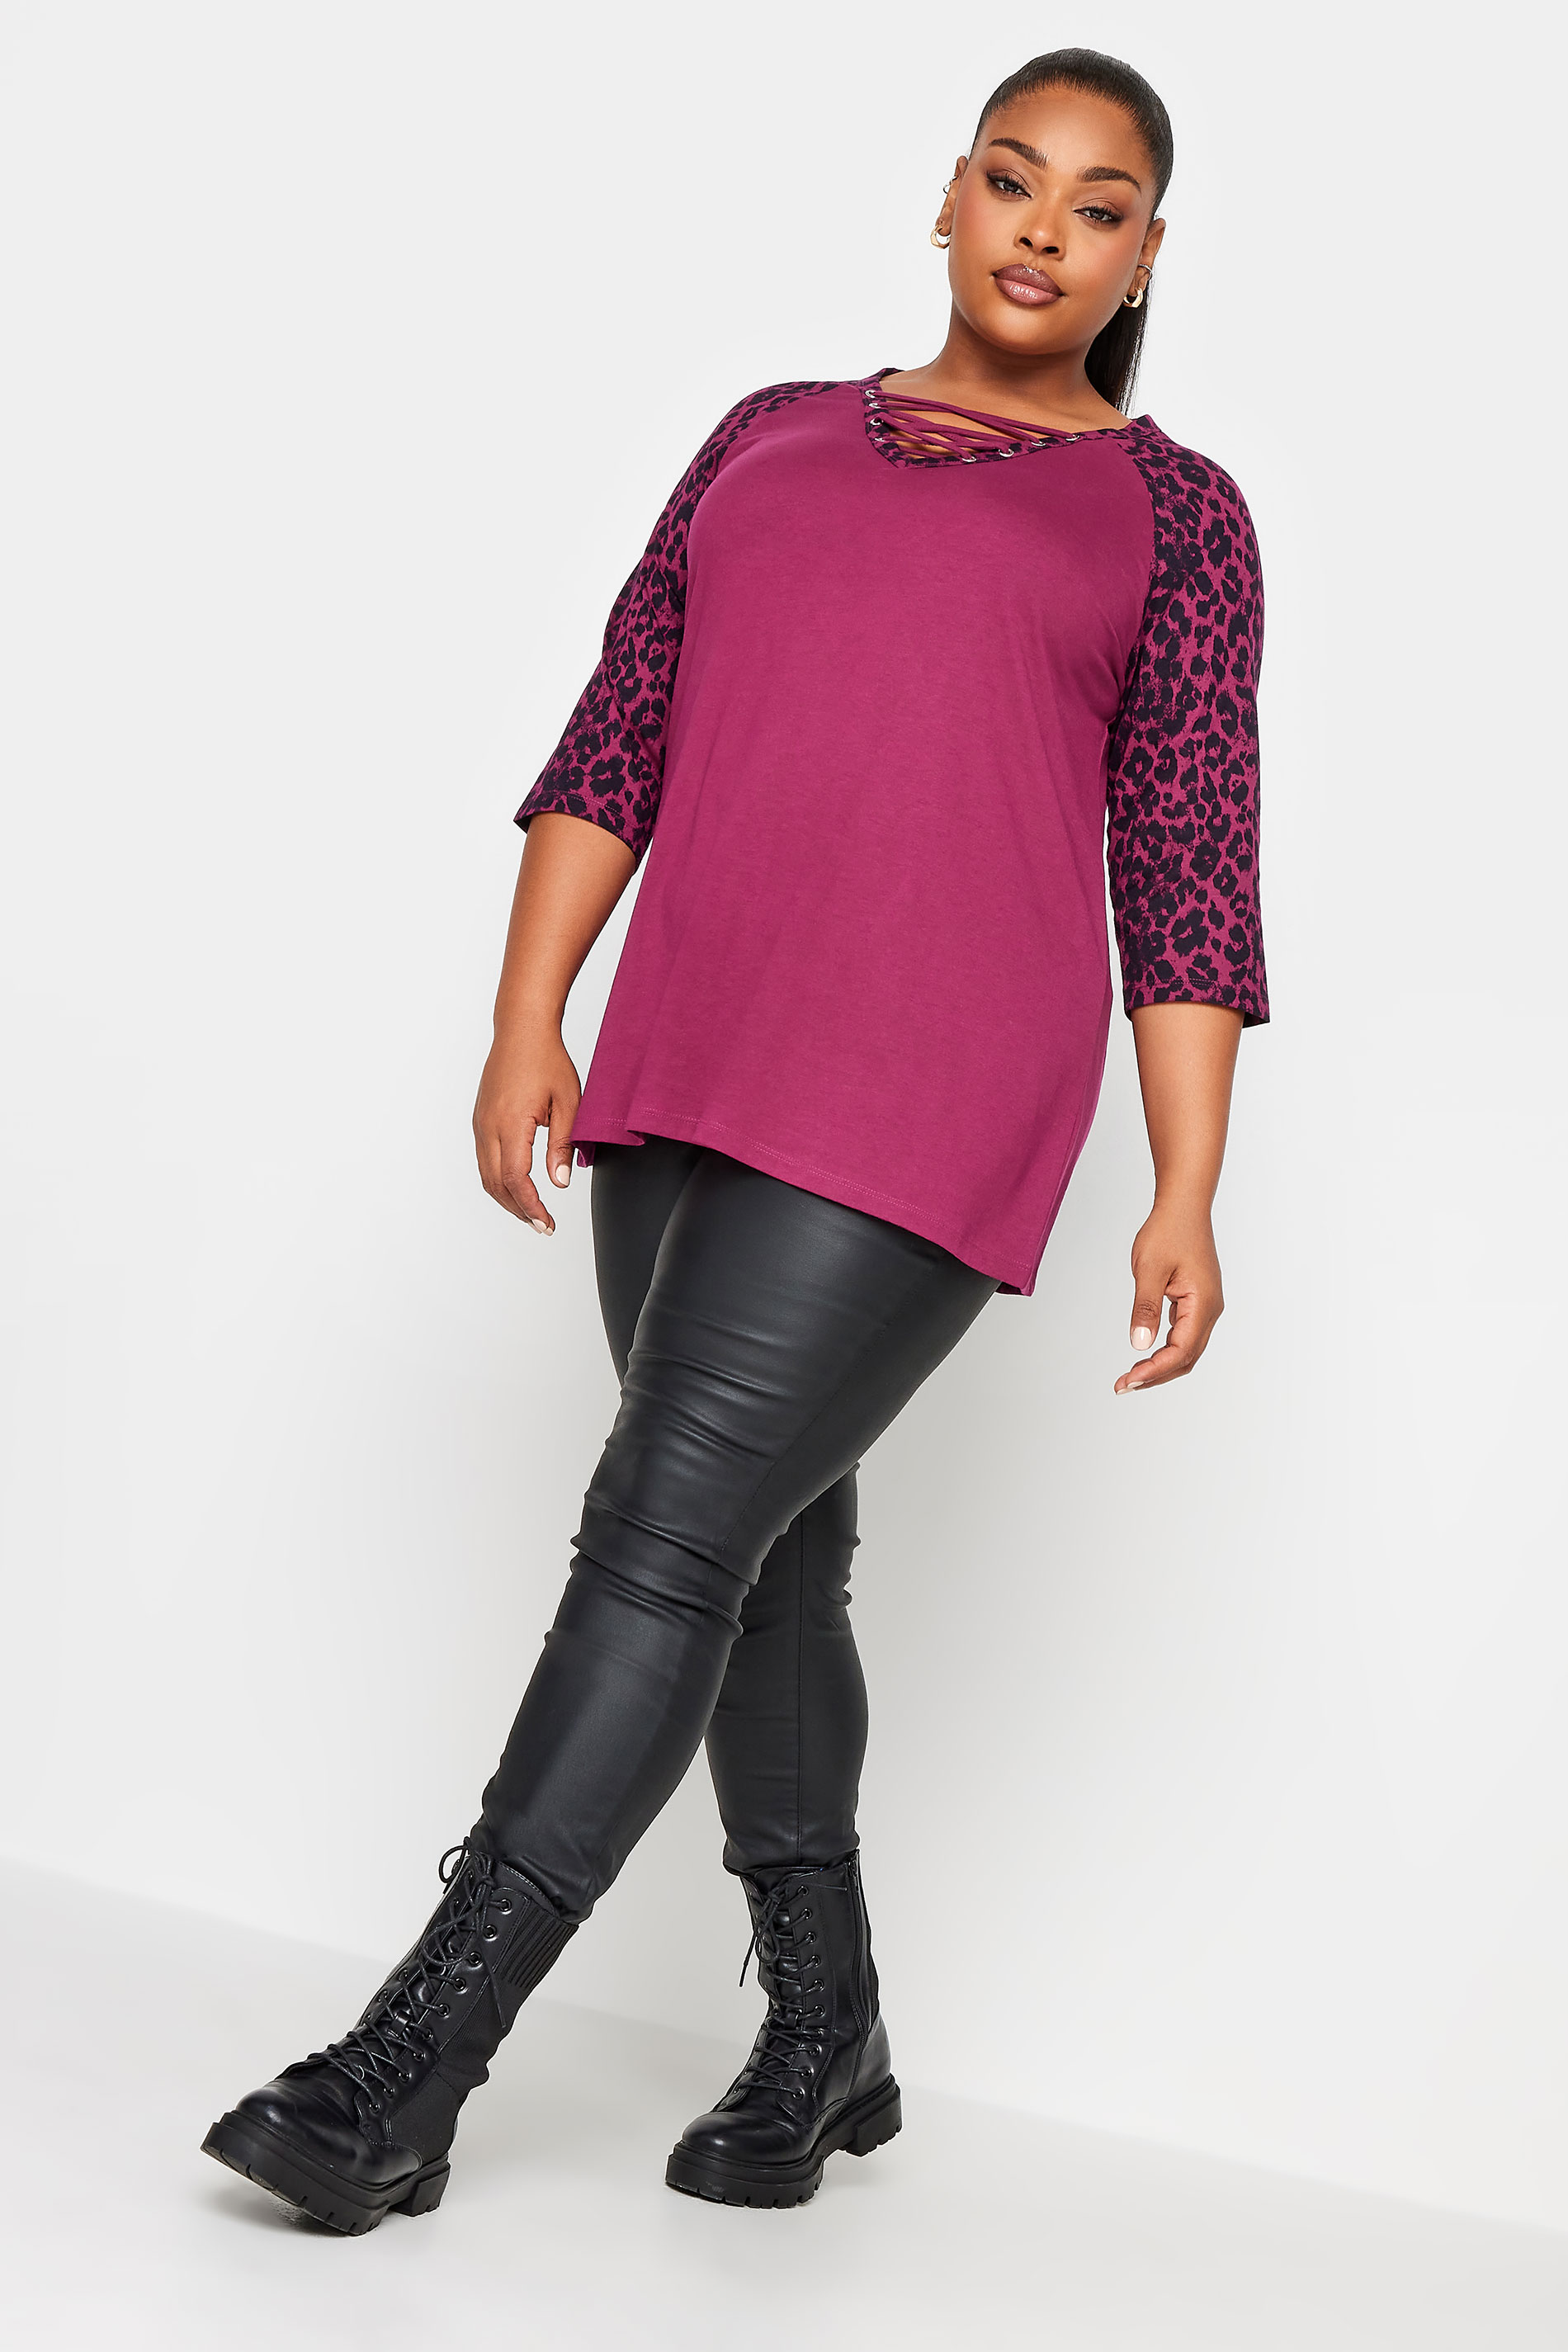 YOURS Plus Size Pink Leopard Print Lace Up Eyelet Top | Yours Clothing 2